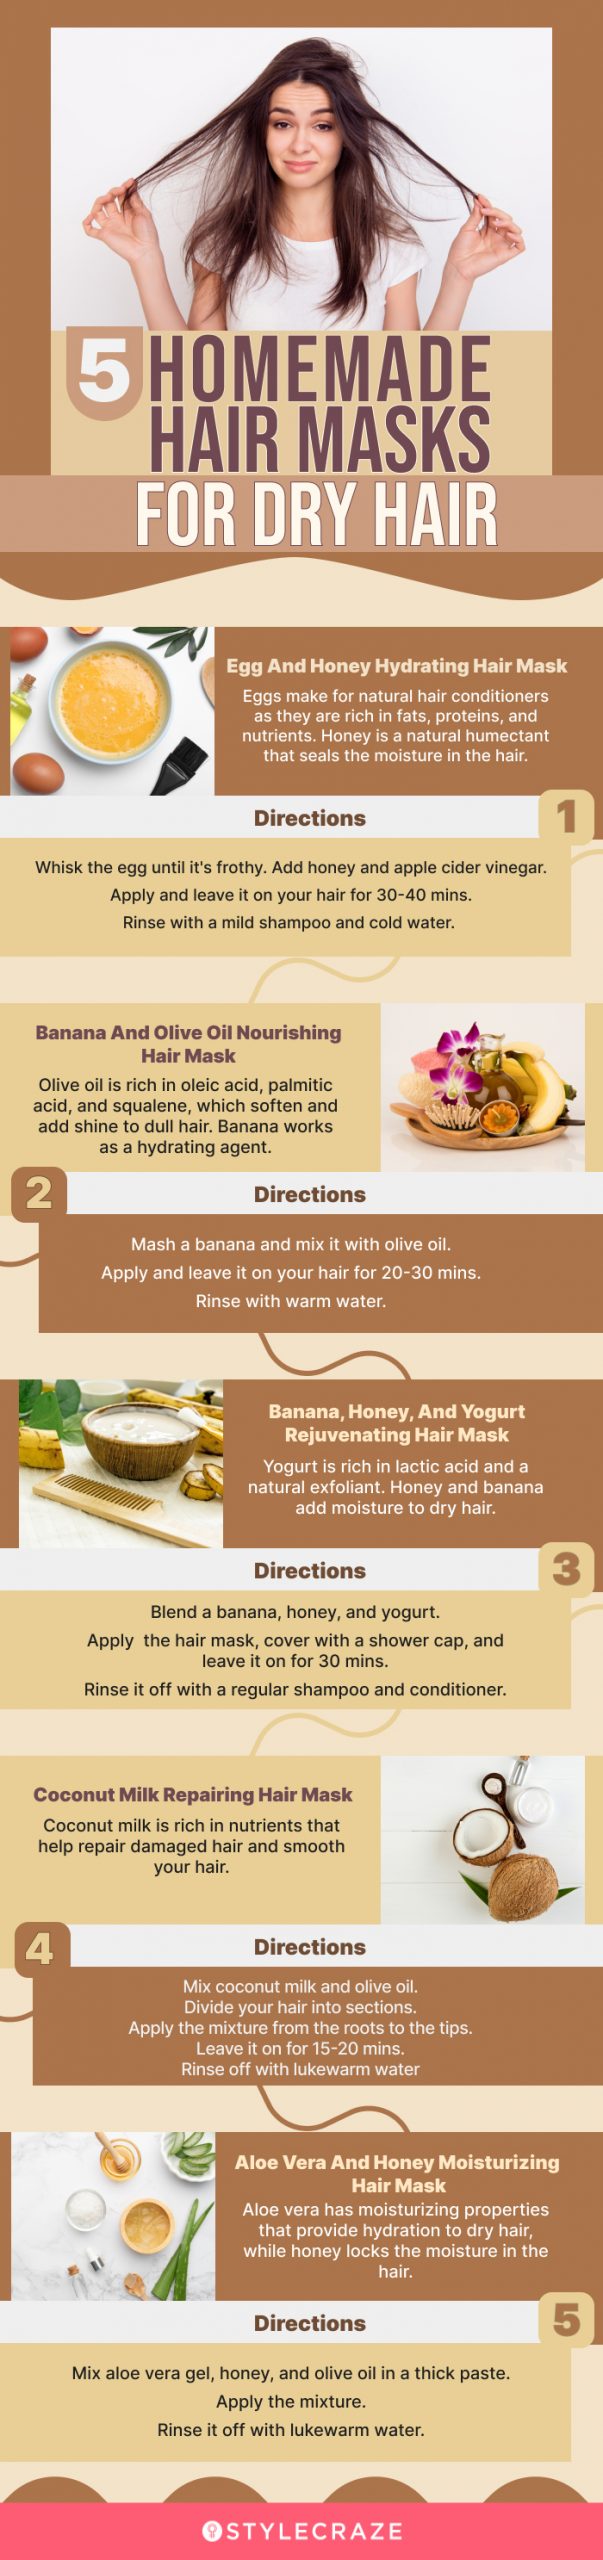 9 Easy And Effective Homemade Hair Masks For Dry Hair